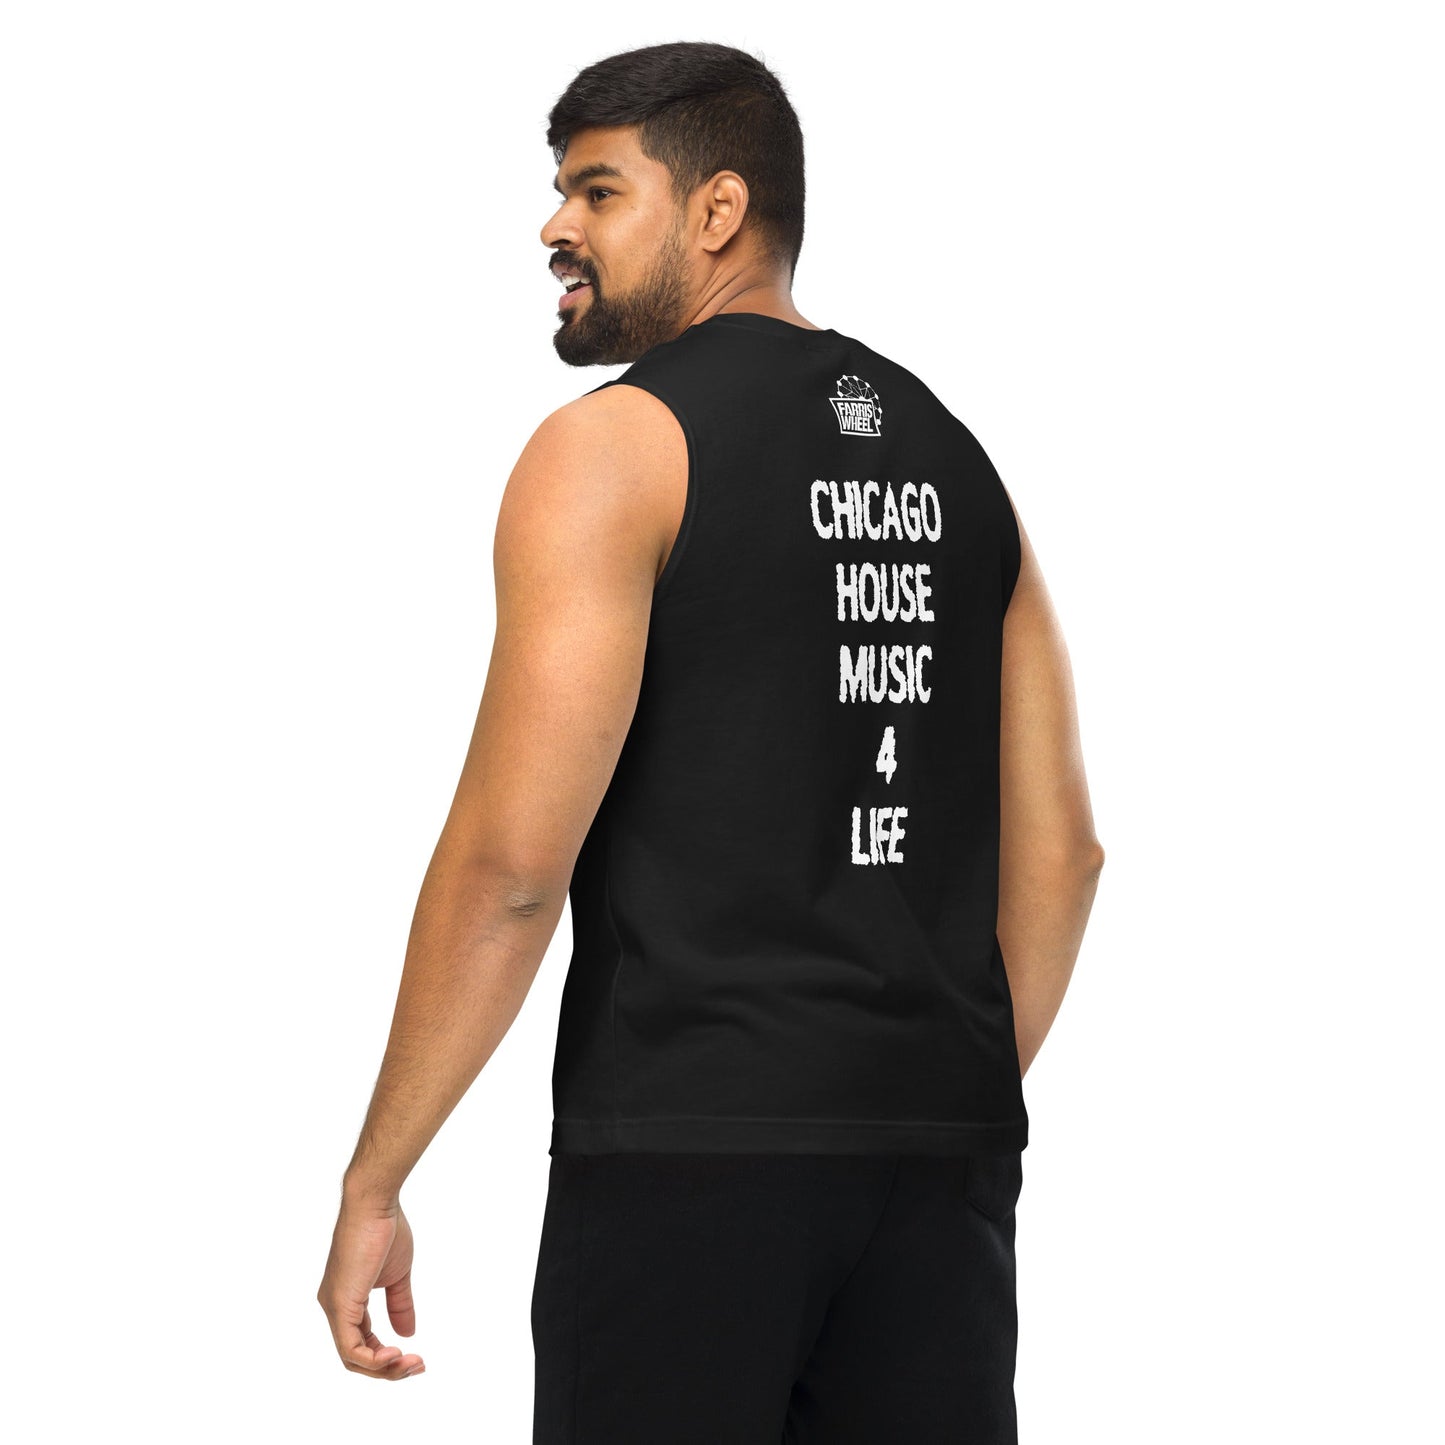 Farris Wheel fWr Unisex Muscle Shirt - BeExtra! Apparel & More